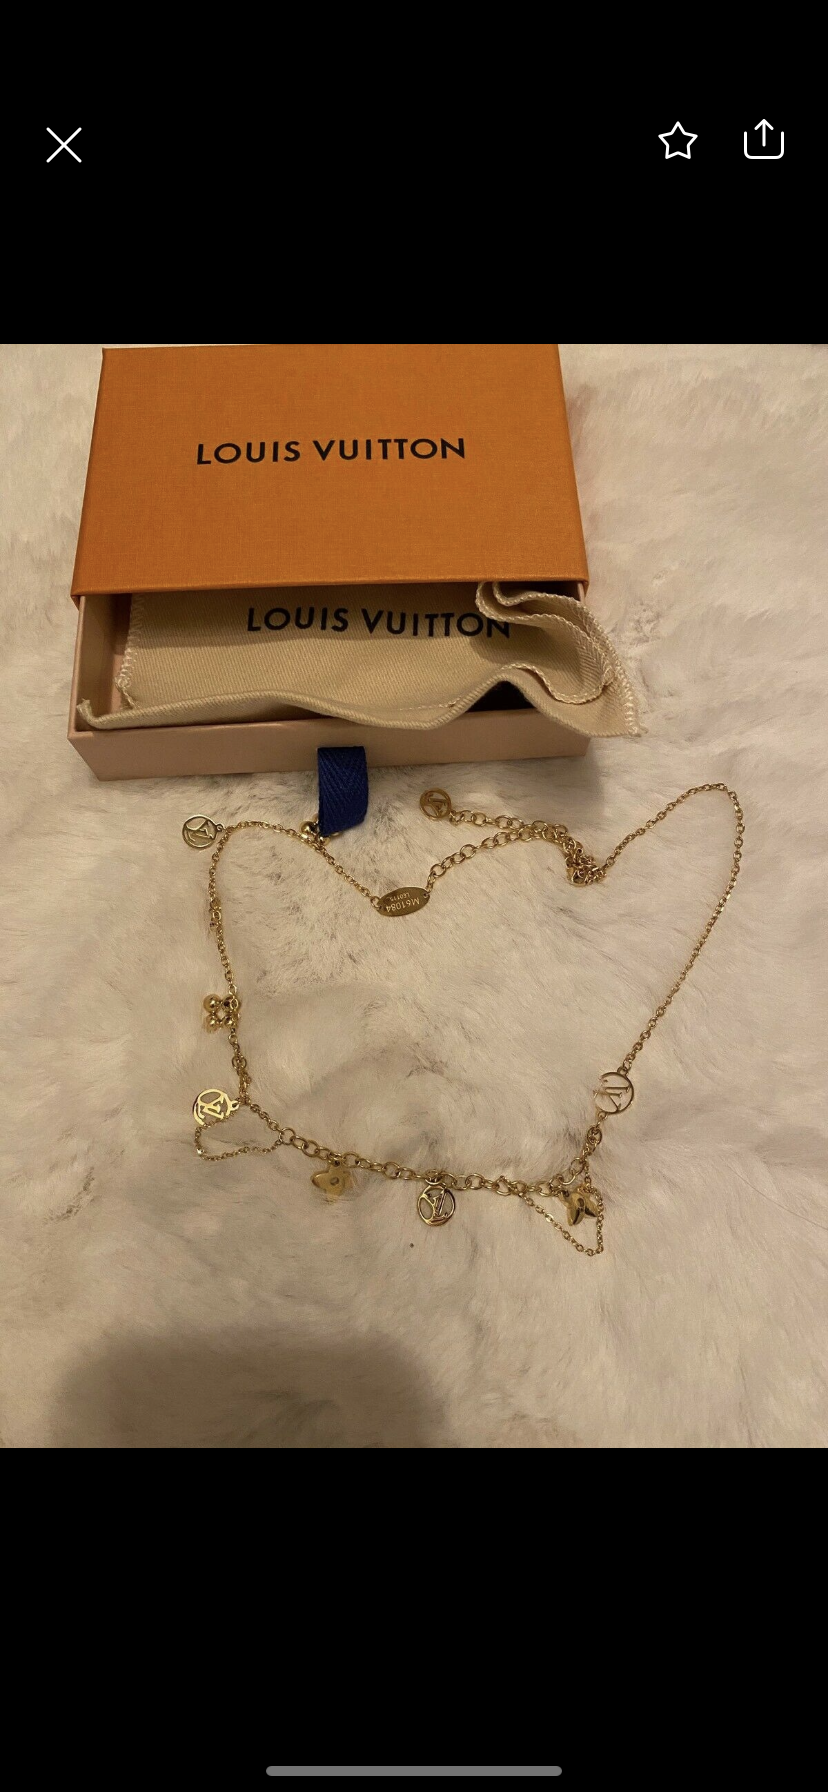 How to Tell If a Louis Vuitton Necklace is Real? – Fetchthelove Inc.